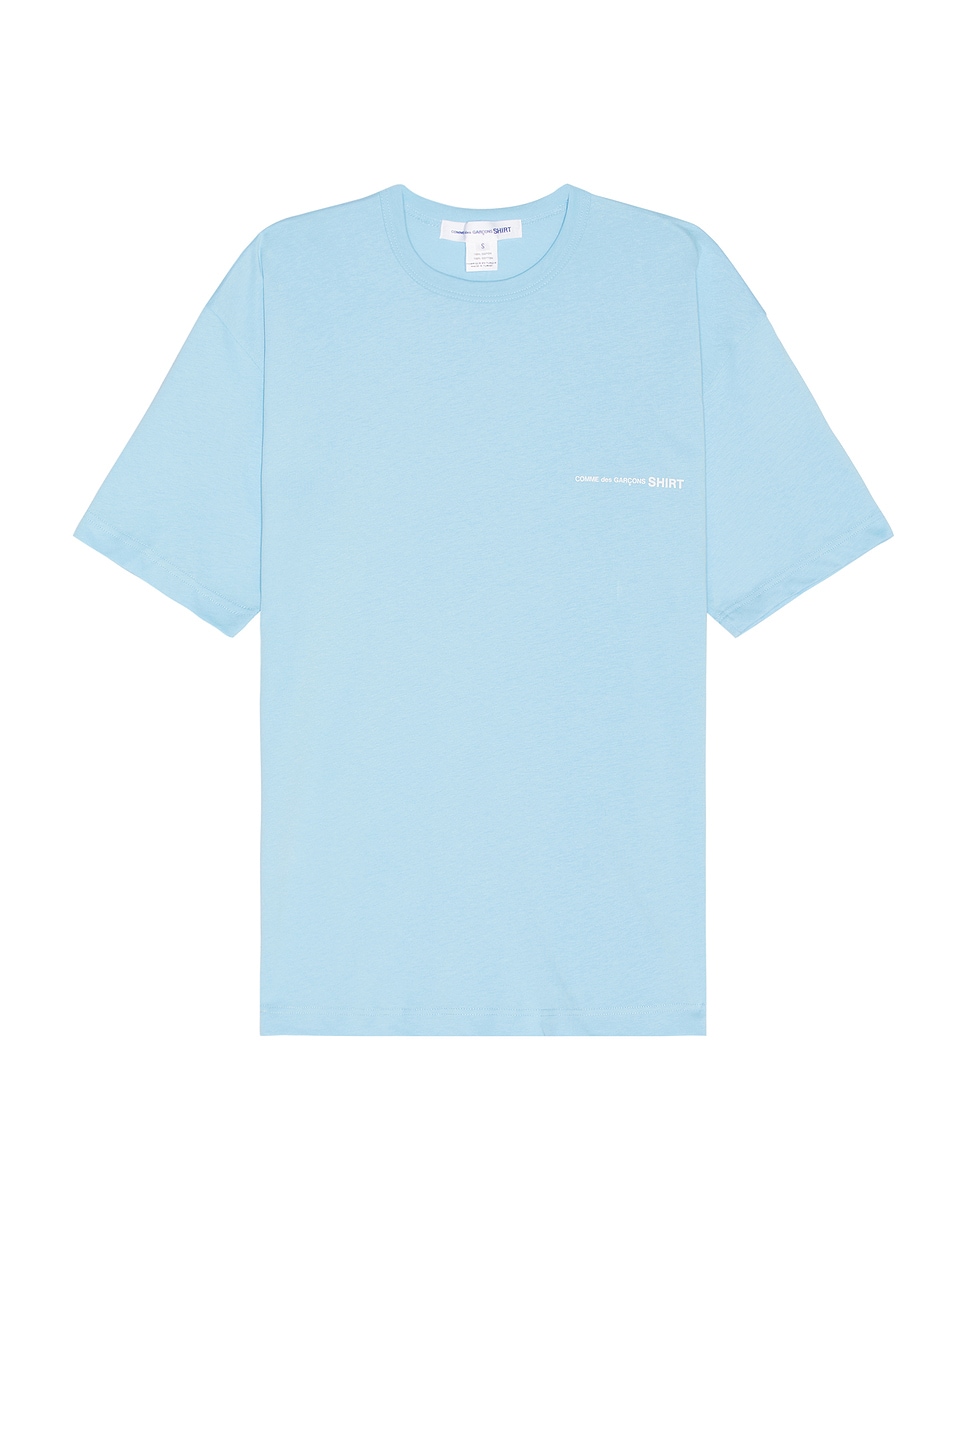 Image 1 of COMME des GARCONS SHIRT x Andy Warhol T-Shirt in Blue